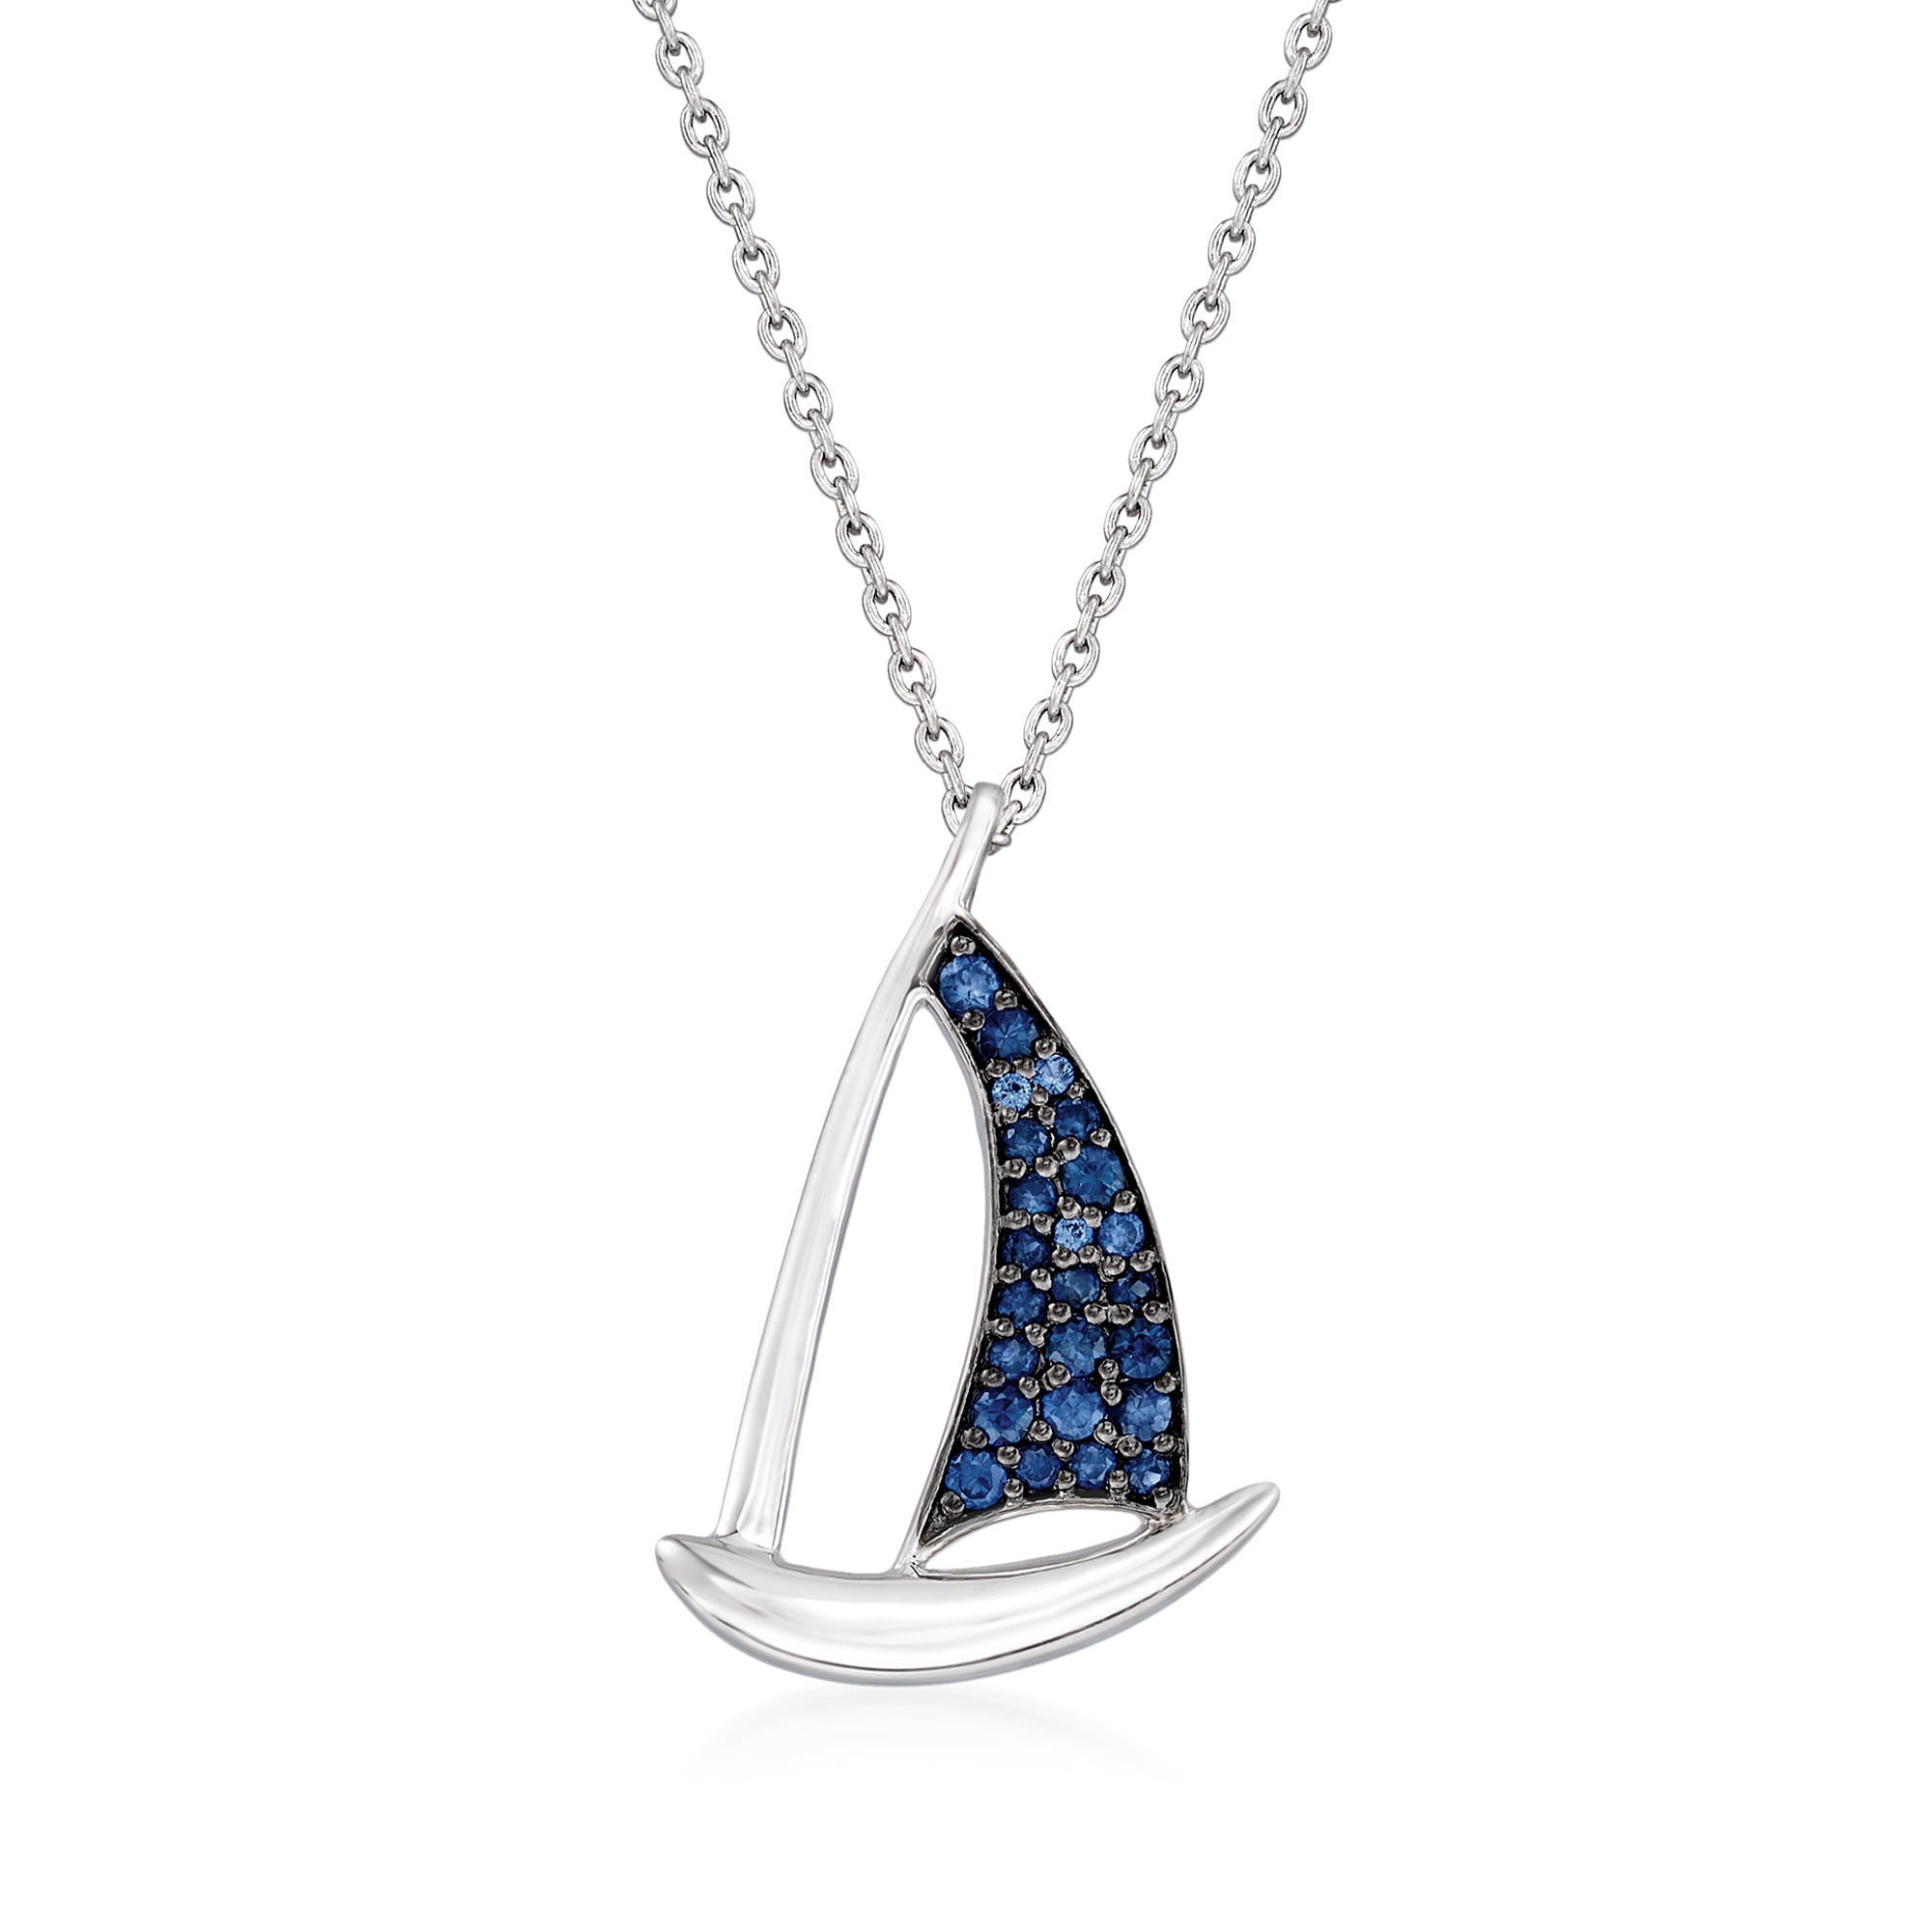 5/8 inch Sterling Silver Sailboat Pendant 